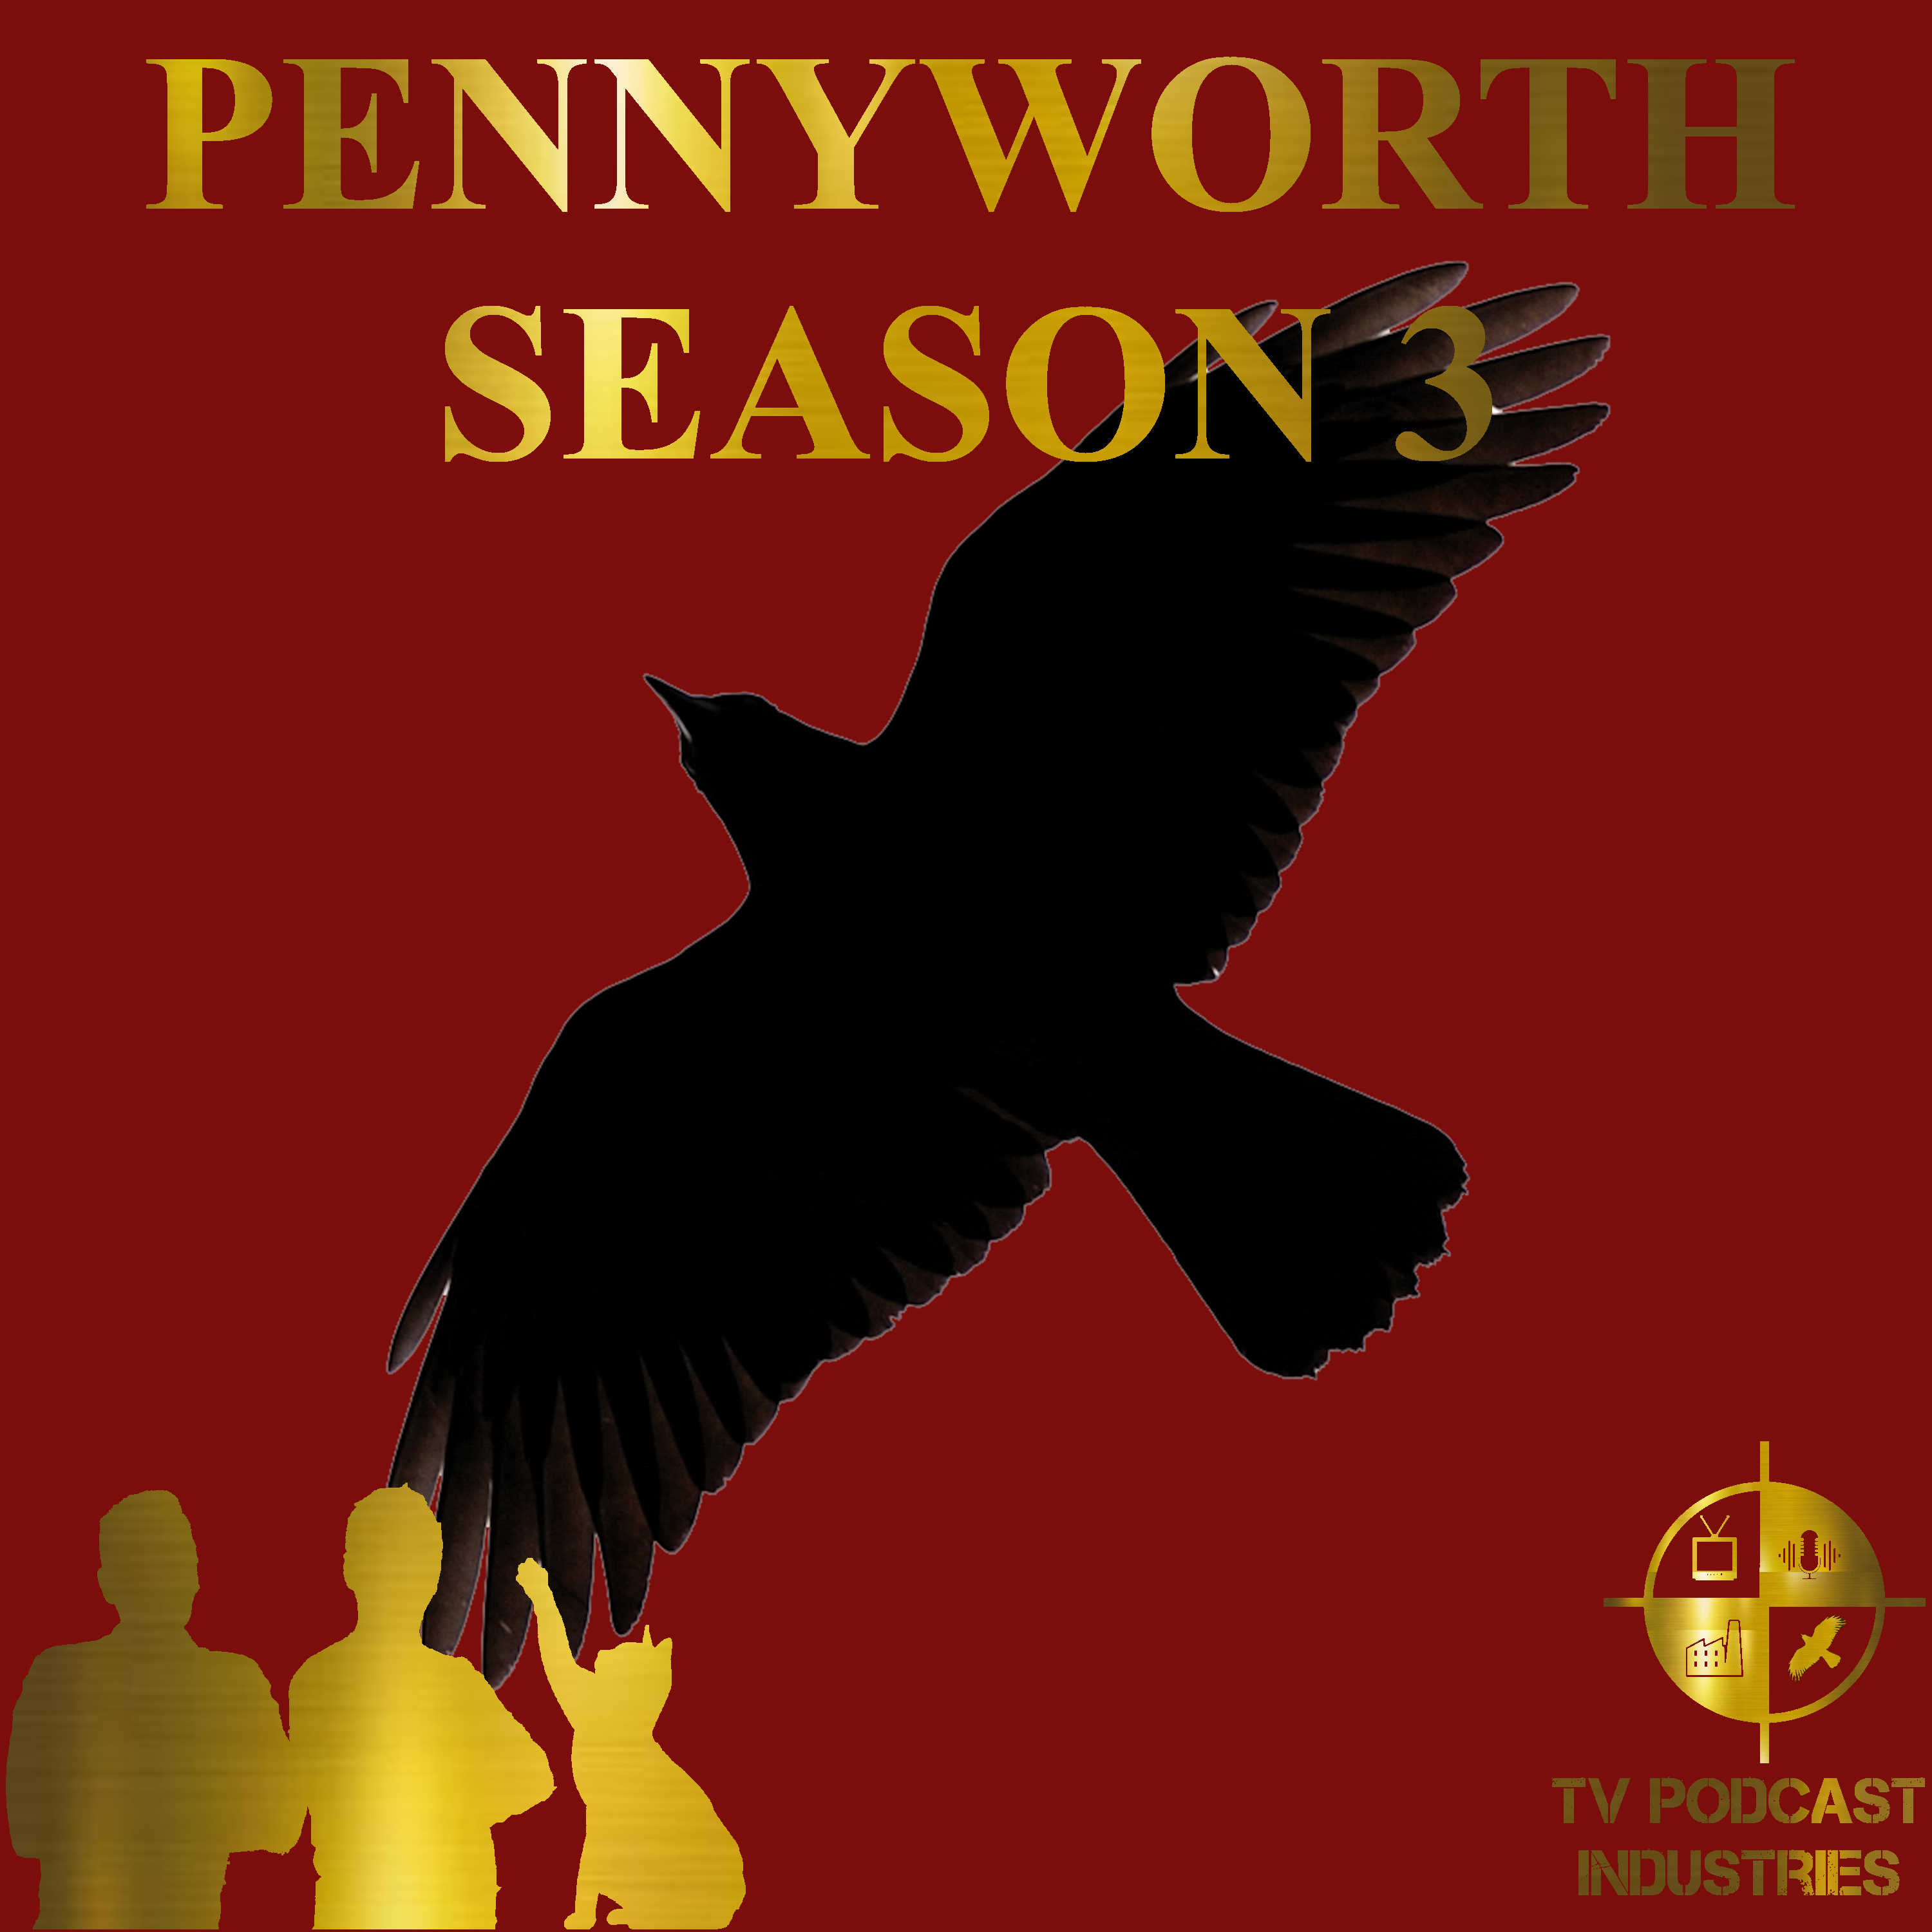 Gotham TV Podcast - The longest running podcast about Pennyworth and Gotham